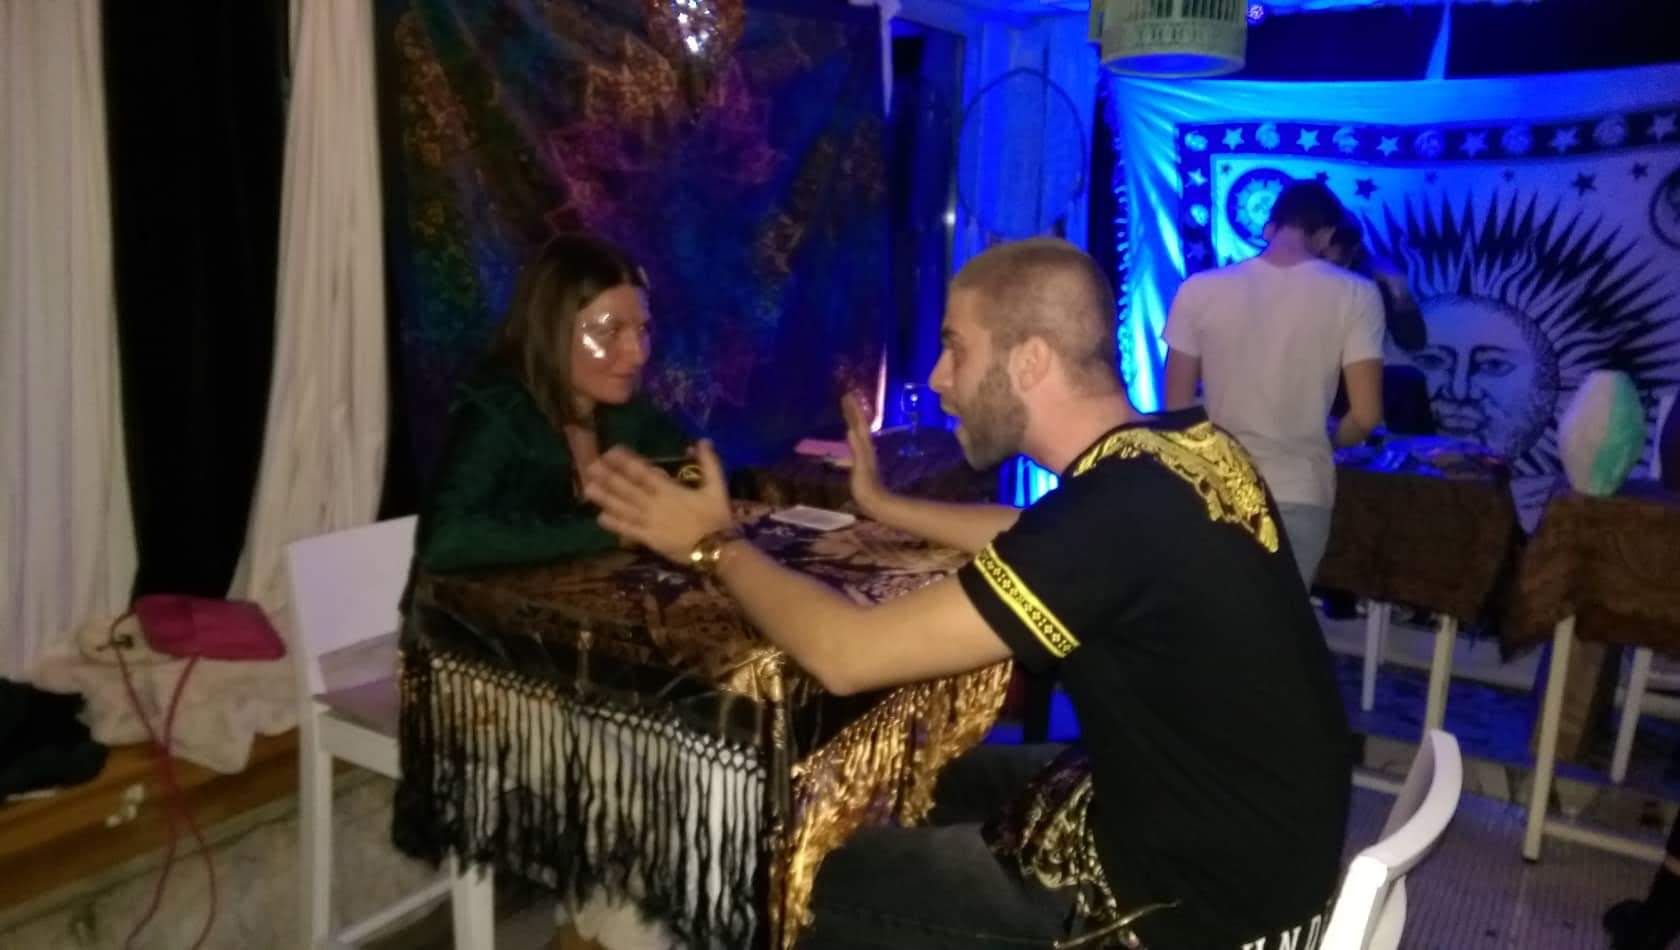 Instant tarot reading with Delina in European night club